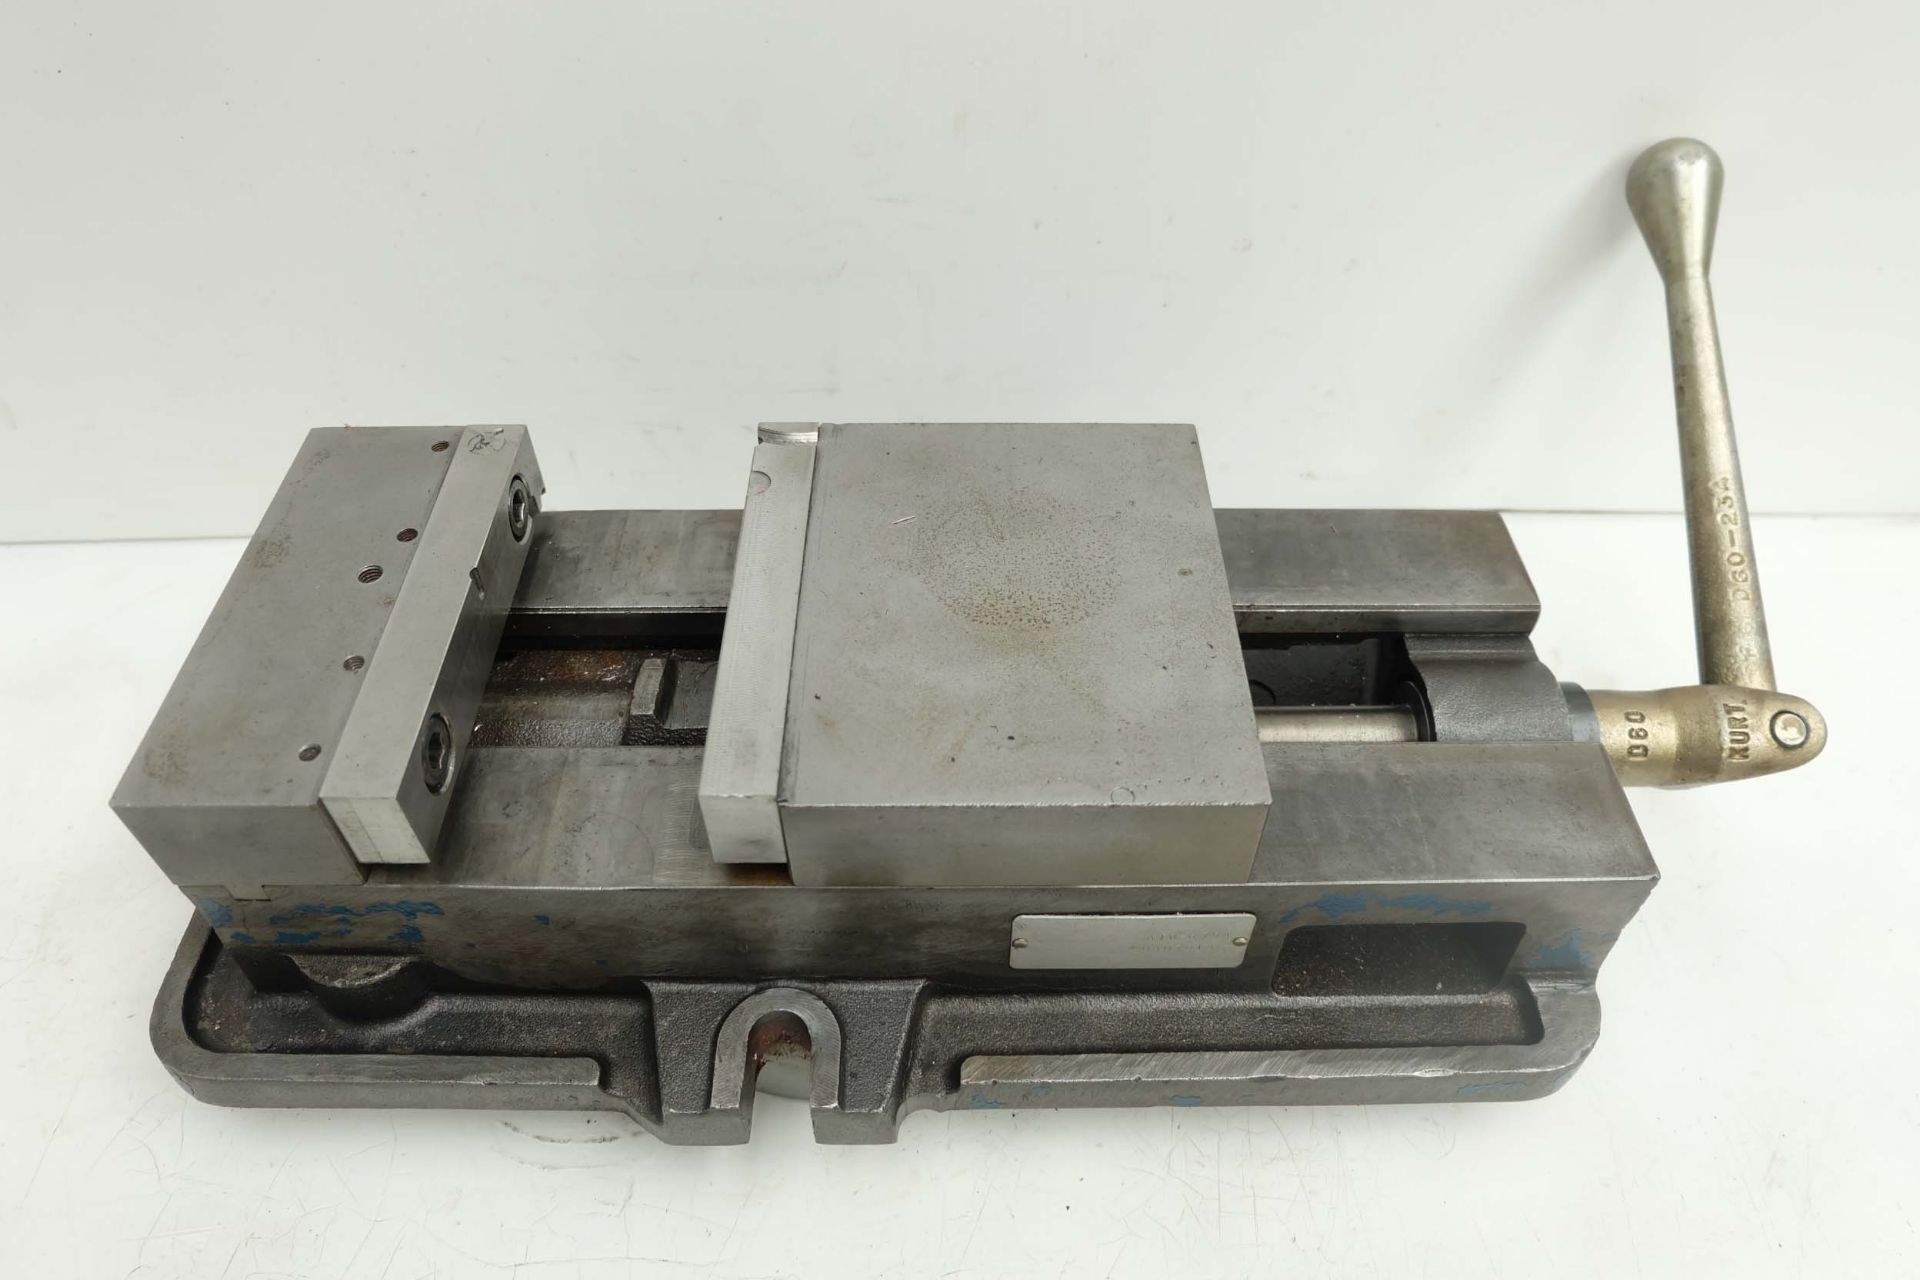 Autowell Model ATW 675A Machine Vice With Integrated Pull Down Mechanism. Width of Vice 6". - Image 2 of 6